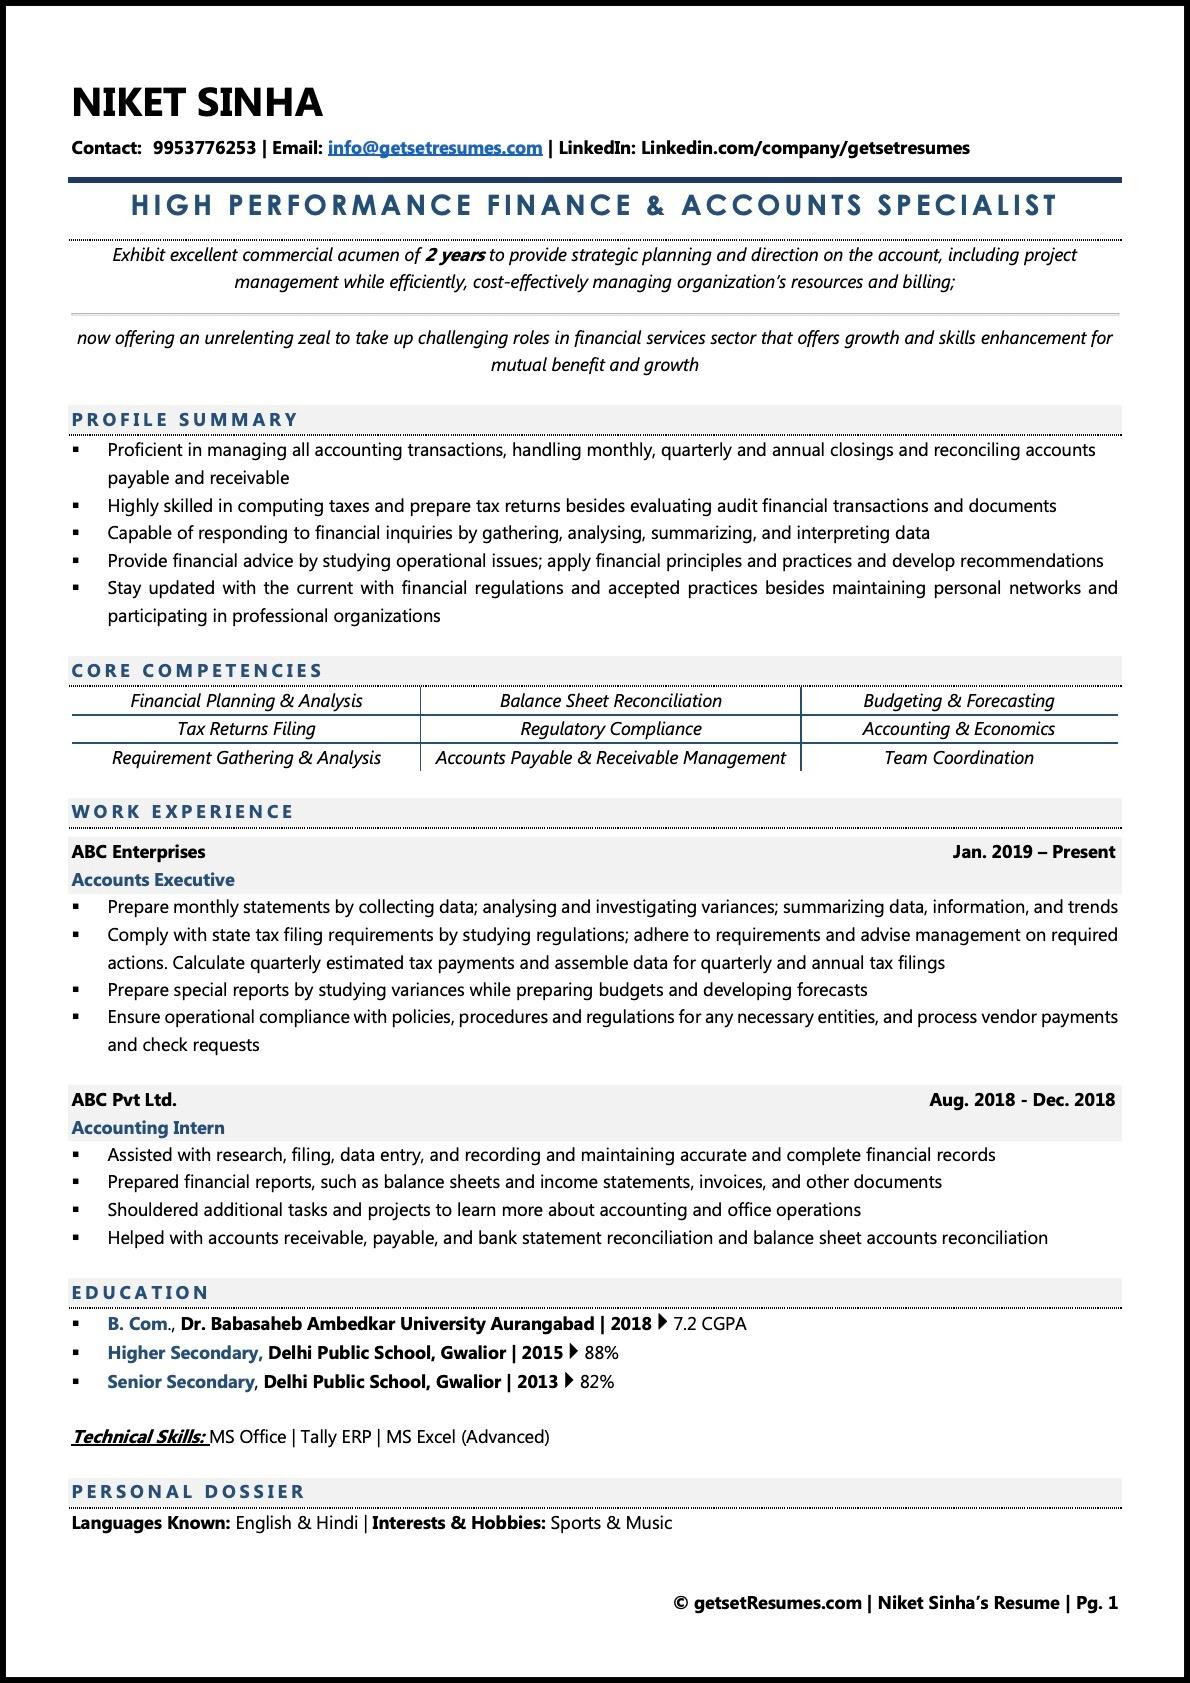 Client Development Account Executive Resume Samples Accounts Executive Resume Examples & Template (with Job Winning Tips)